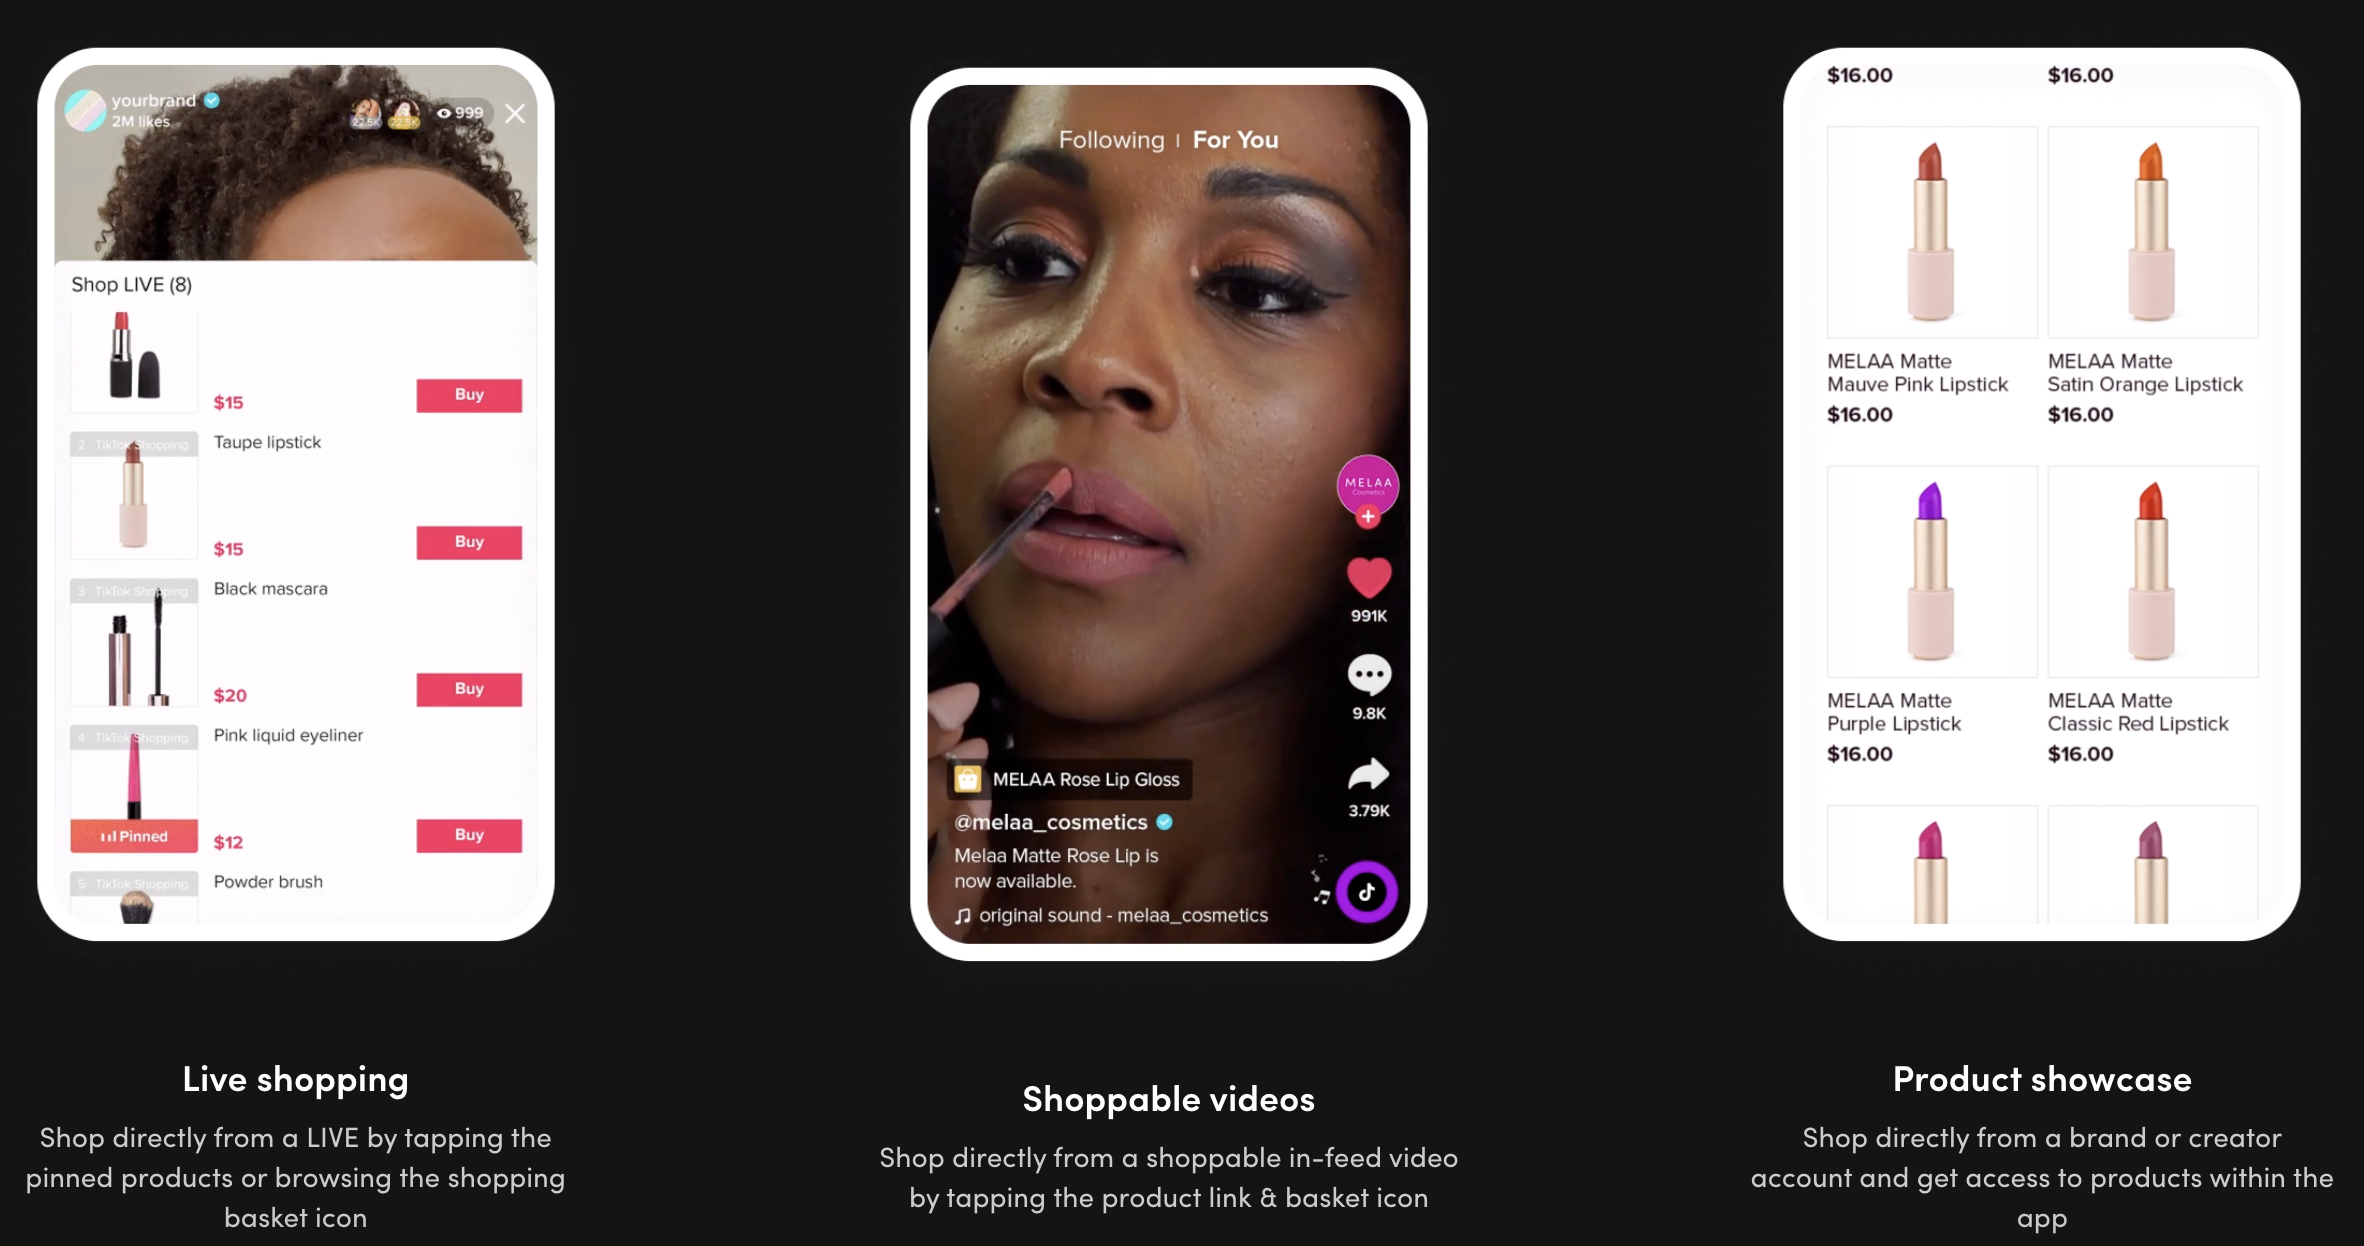 Three side-by-side screenshots showing different options to shop on TikTok - live shopping, shoppable videos, product showcase